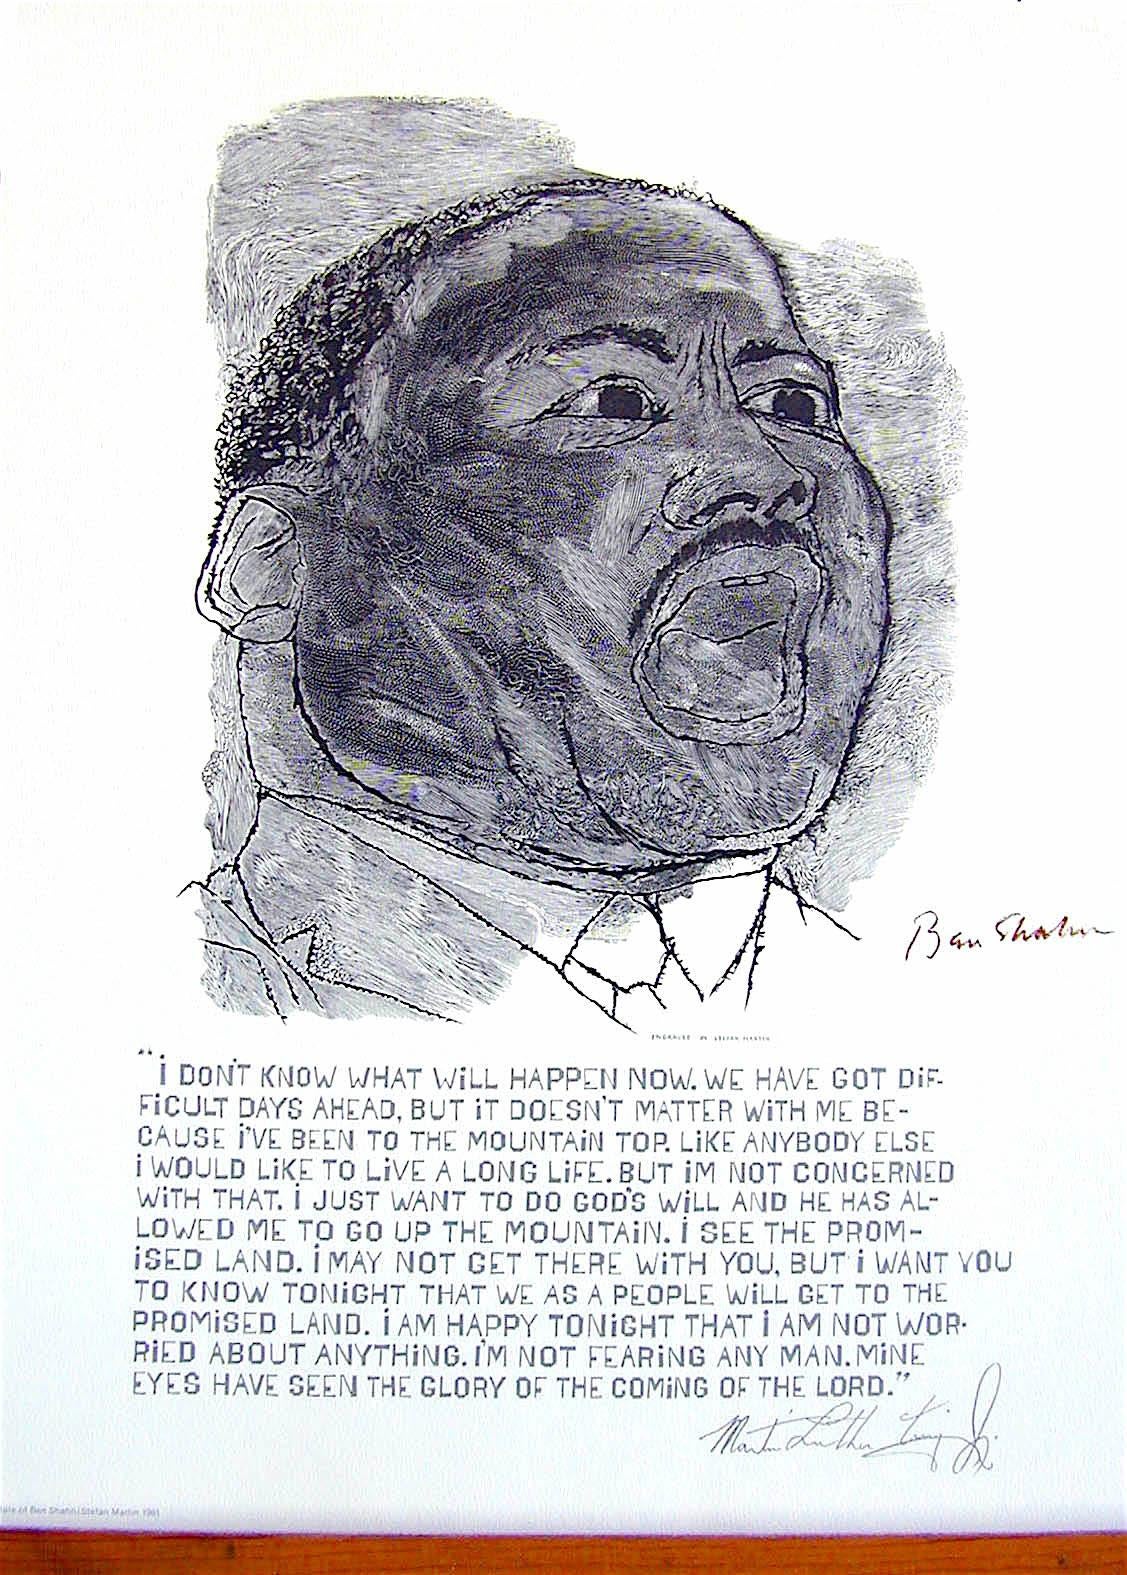 Martin Luther King Jr.- I Have A Dream,  Stefan Martin BW Portrait, Civil Rights 1